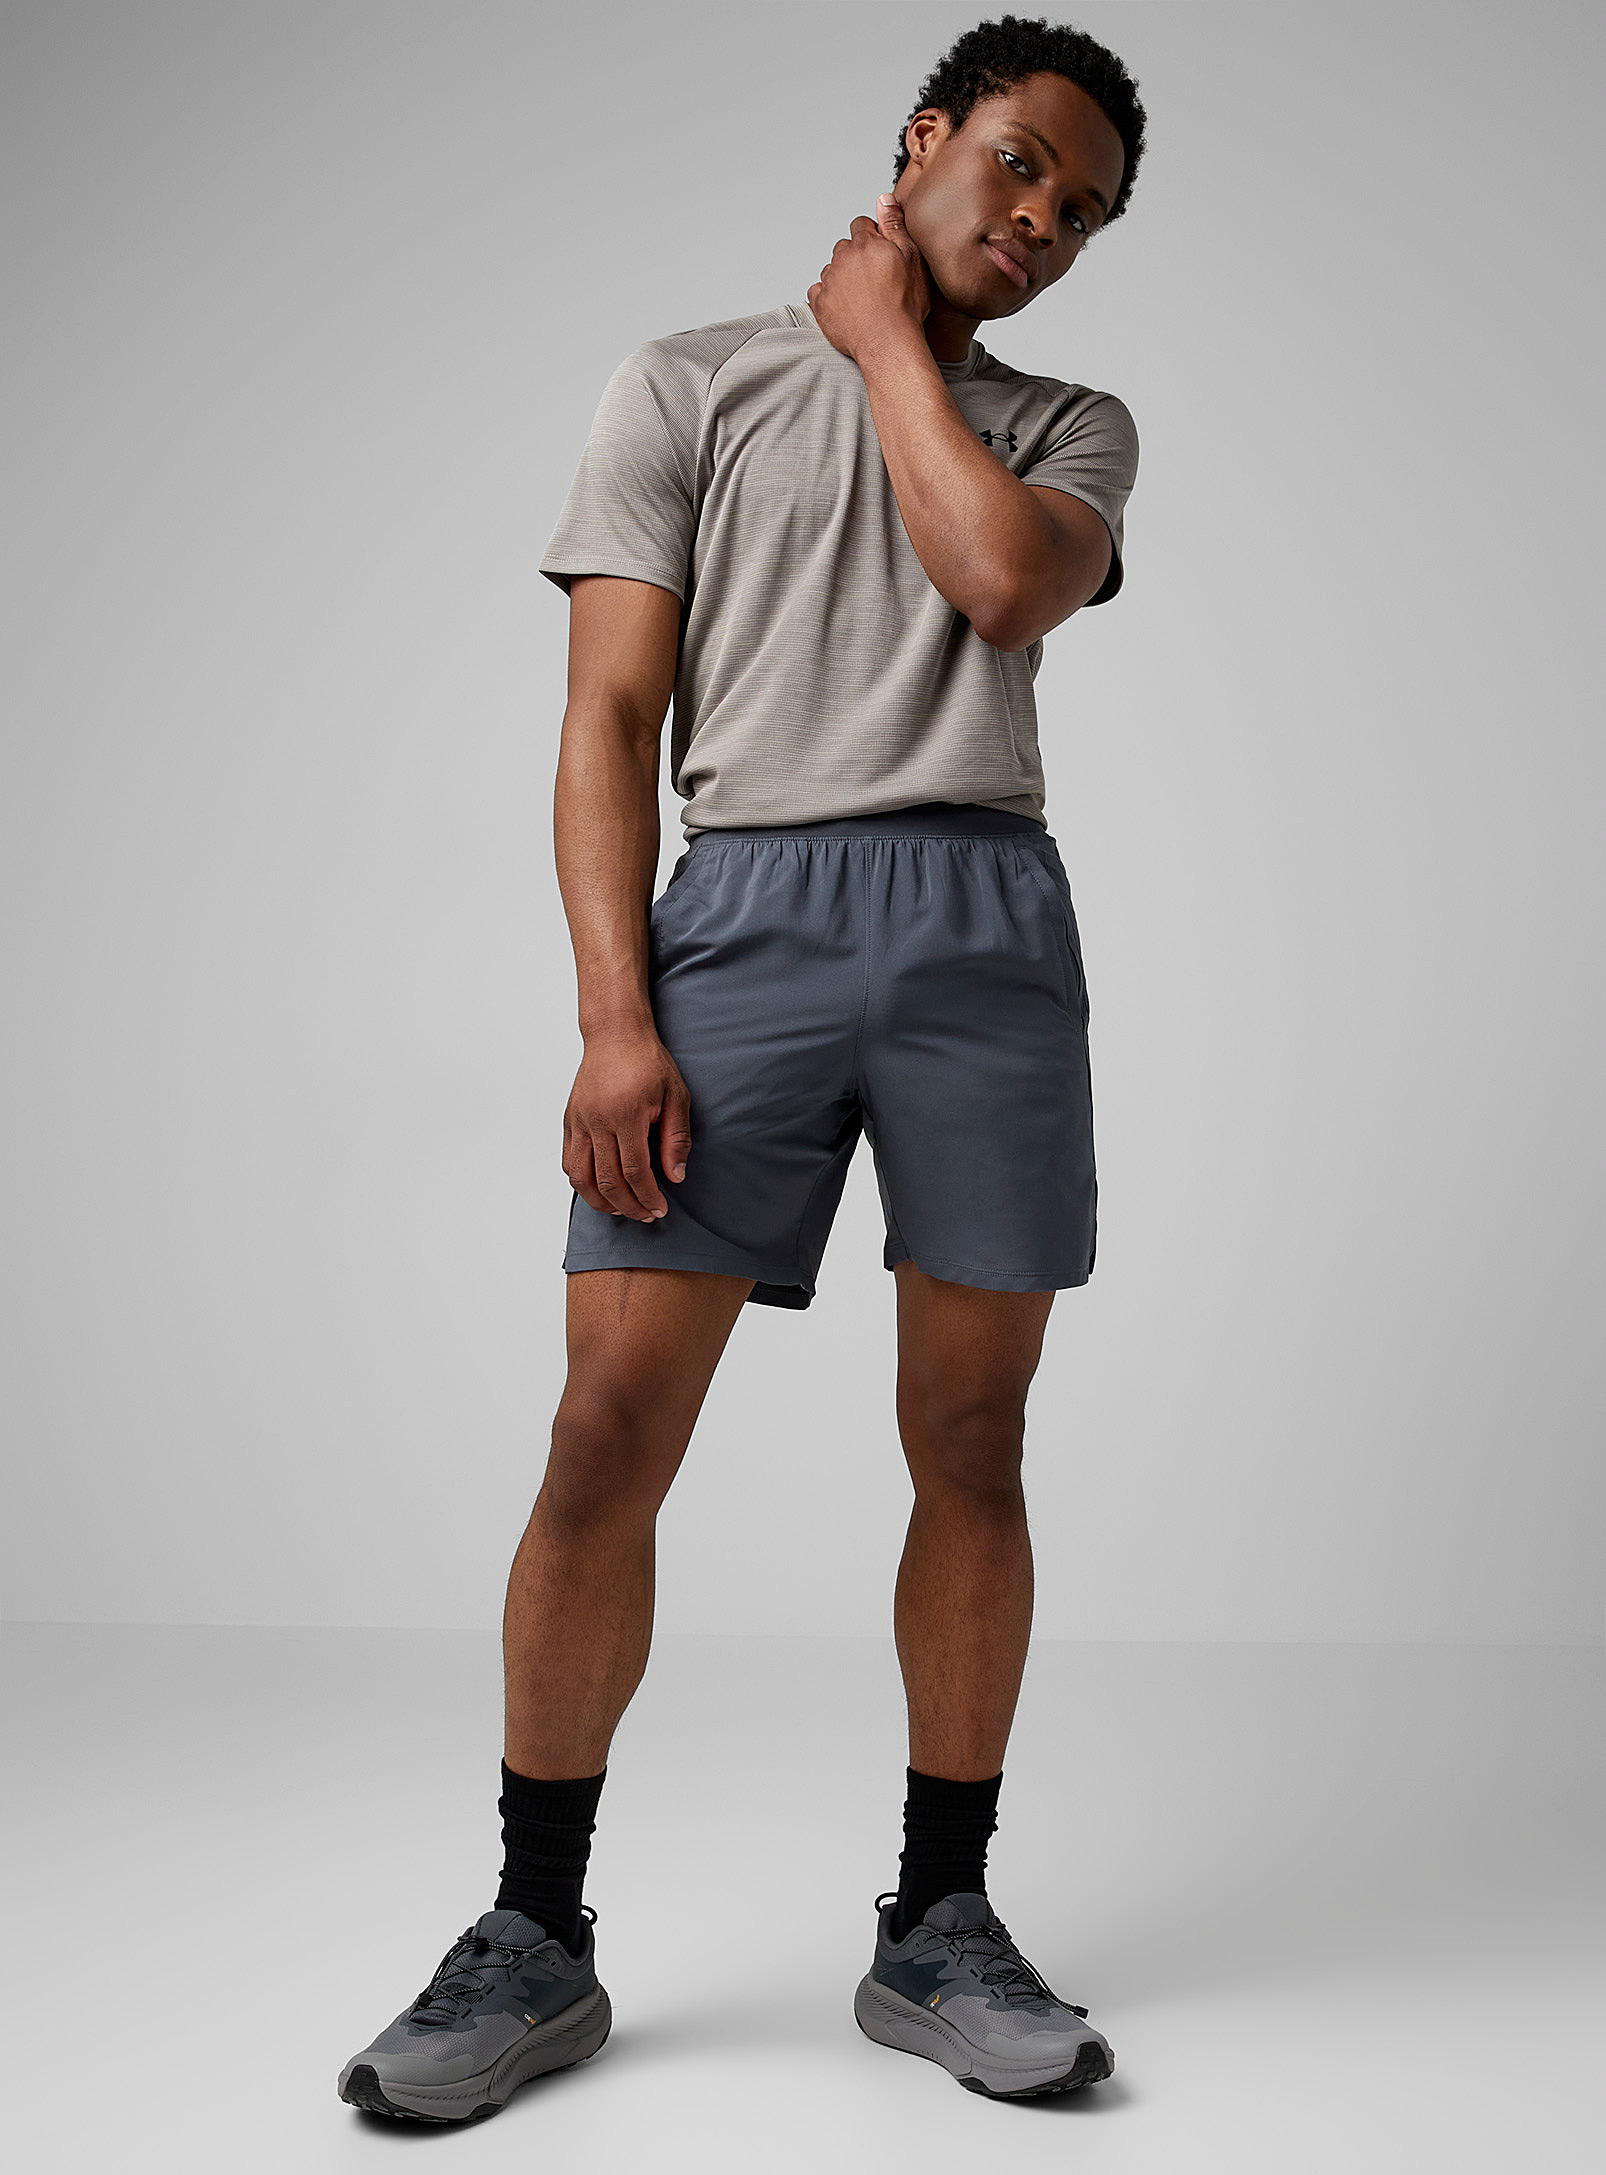 Under Armour Launch Fluid Short In Gray